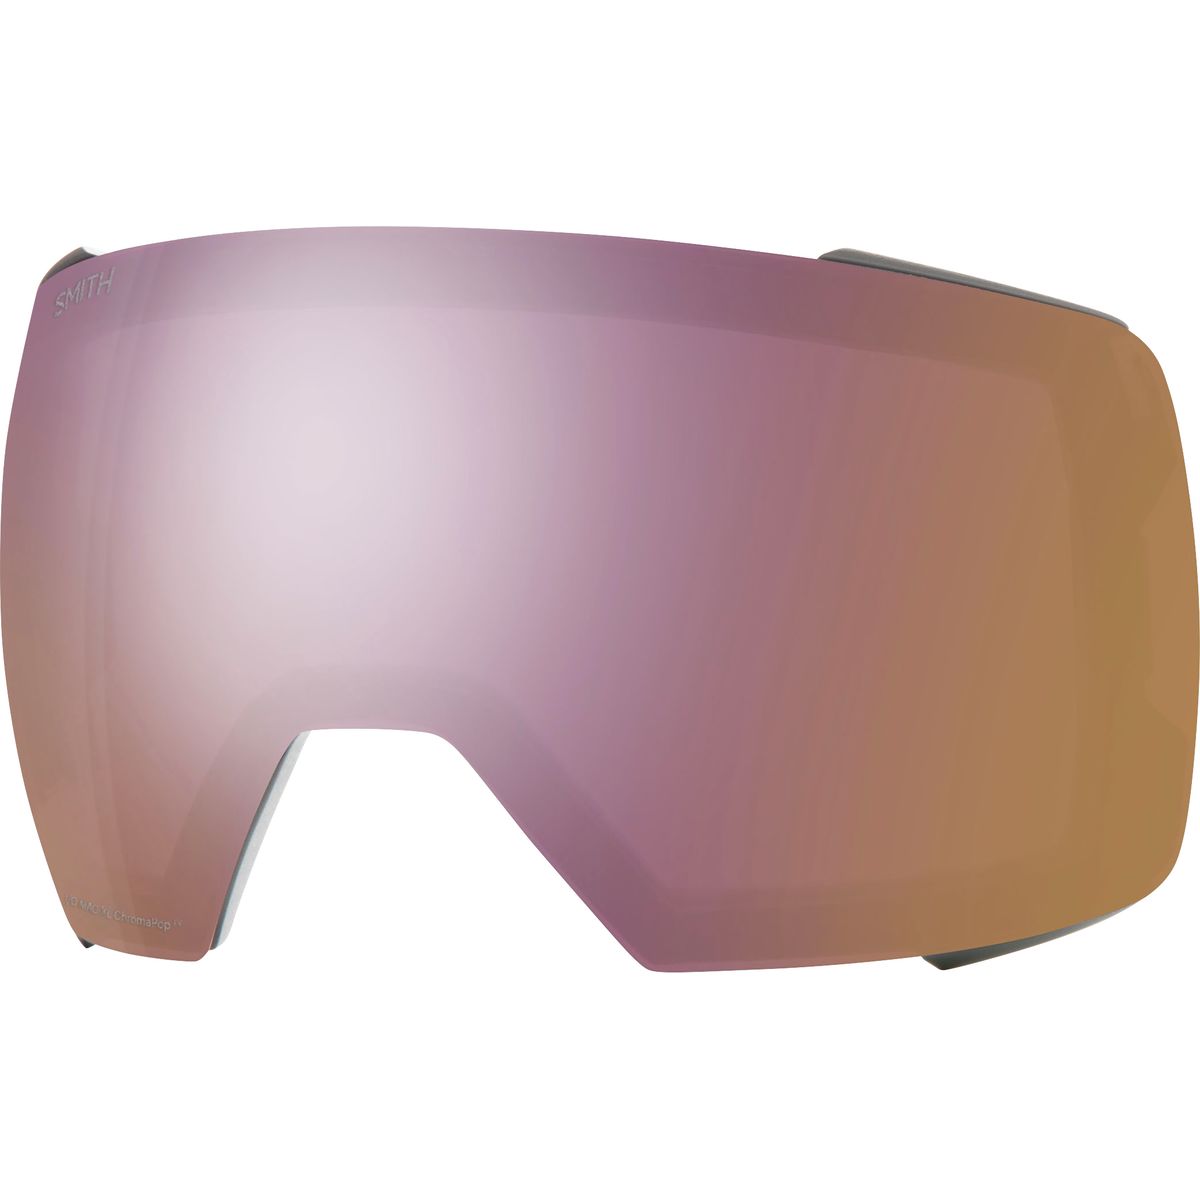 Smith I/O MAG XL Goggles Replacement Lens